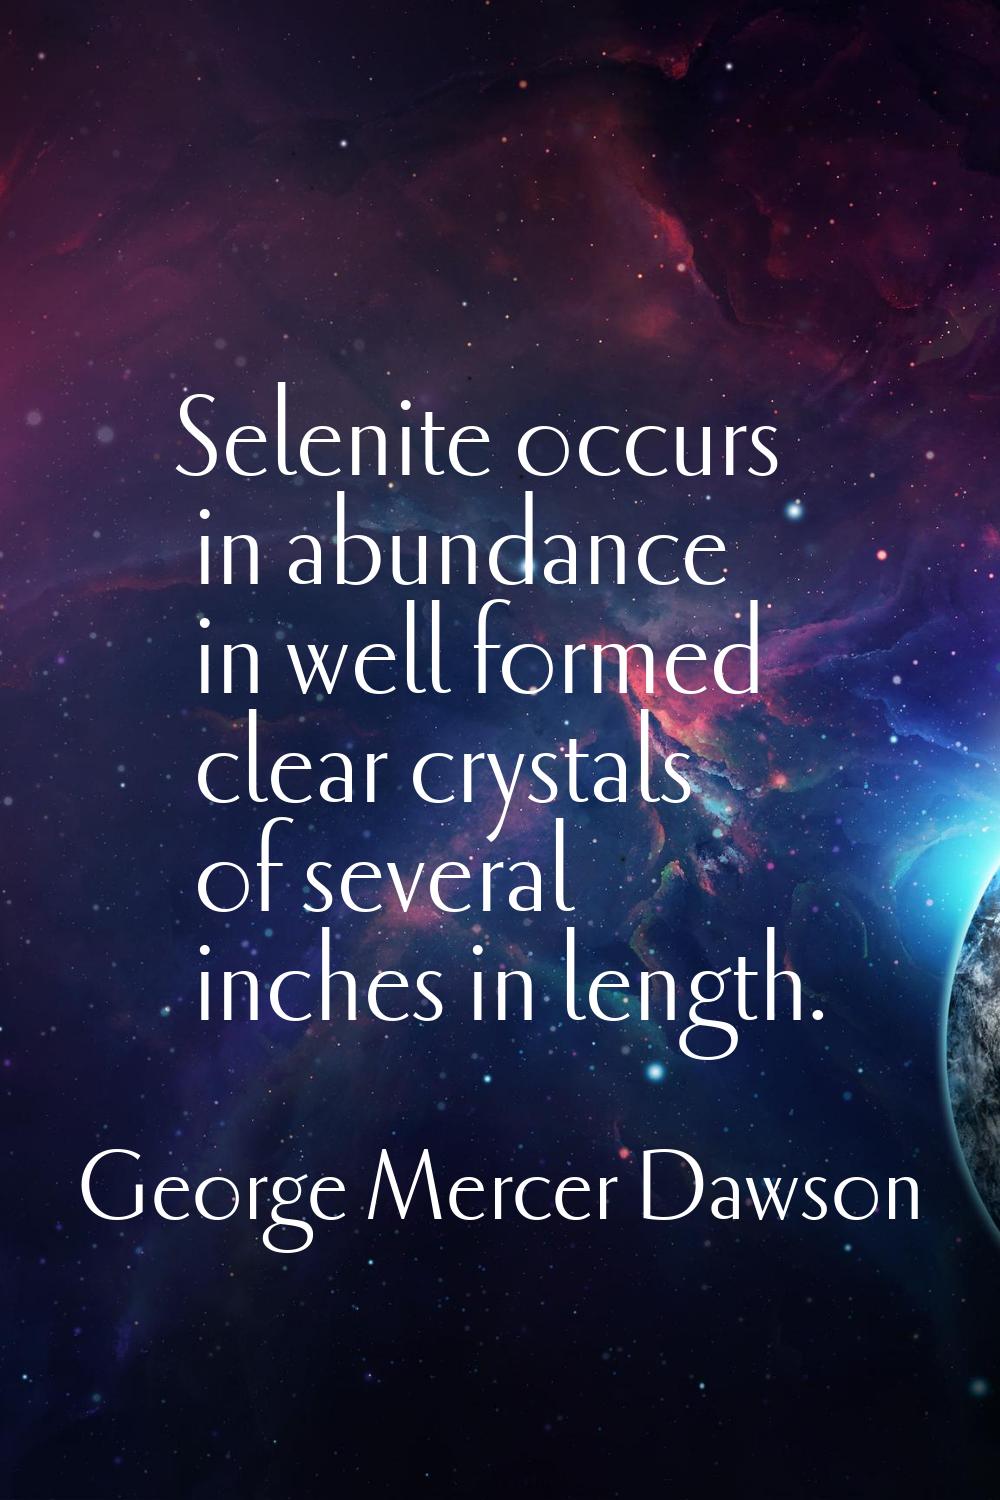 Selenite occurs in abundance in well formed clear crystals of several inches in length.